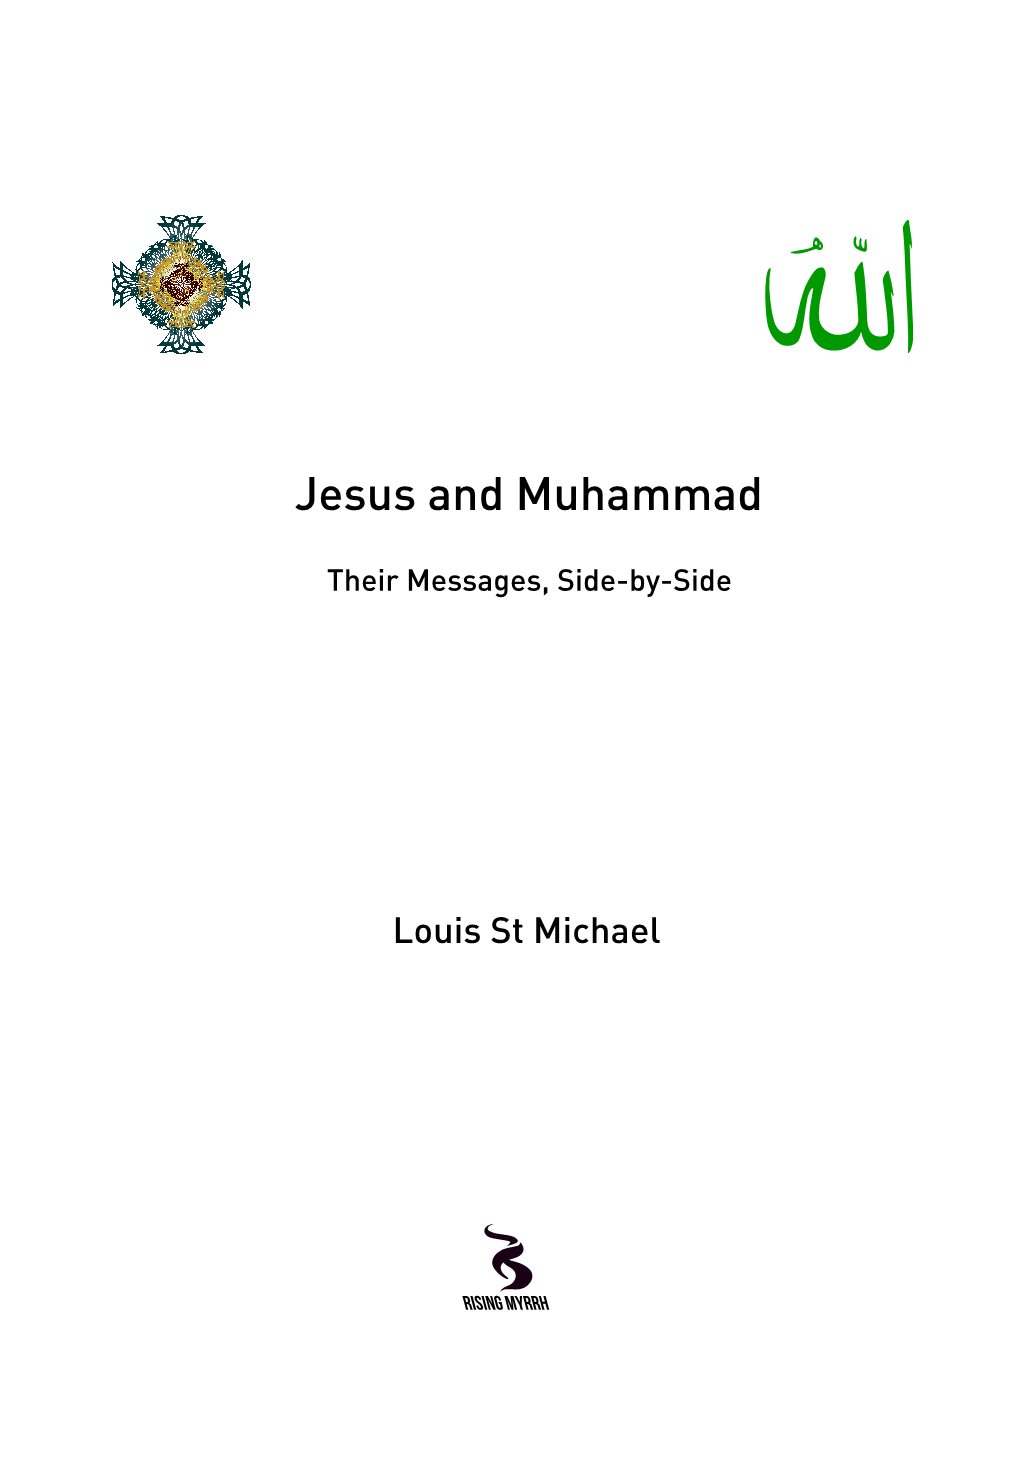 Jesus and Muhammad: Their Messages Side-By-Side